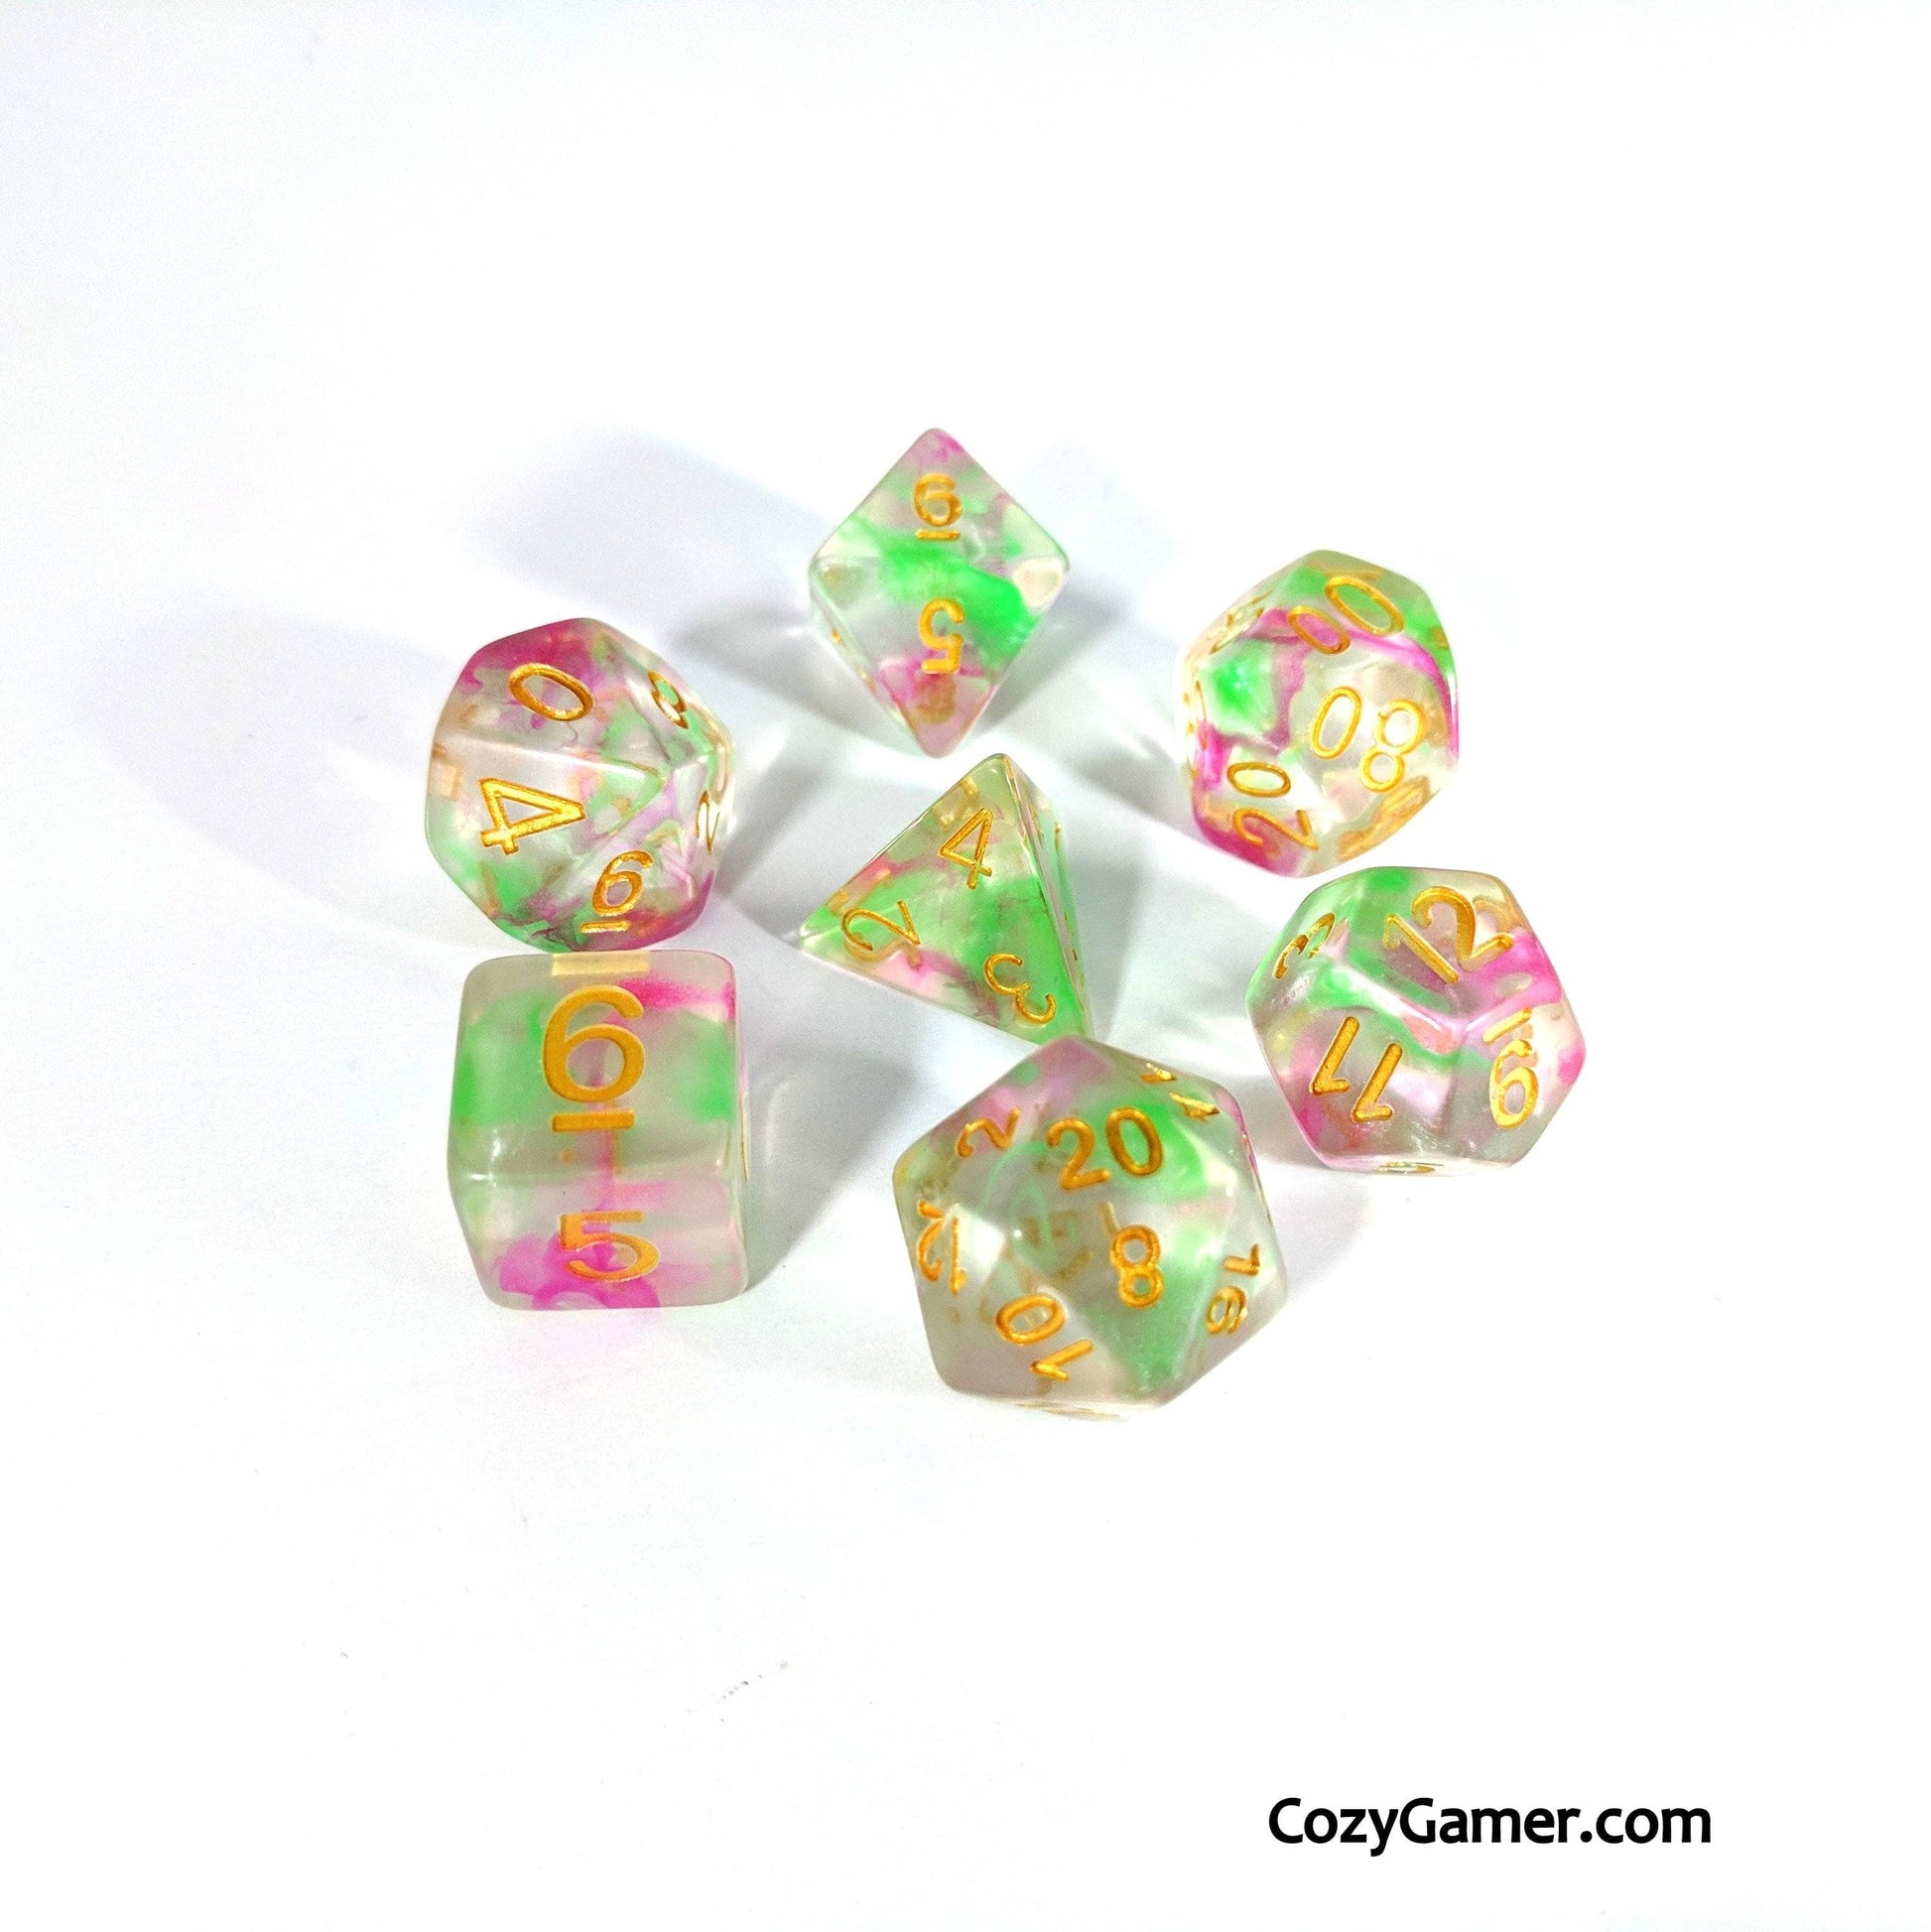 Charmer DnD Dice Set, Translucent Dice with Pink and Green Ink - CozyGamer